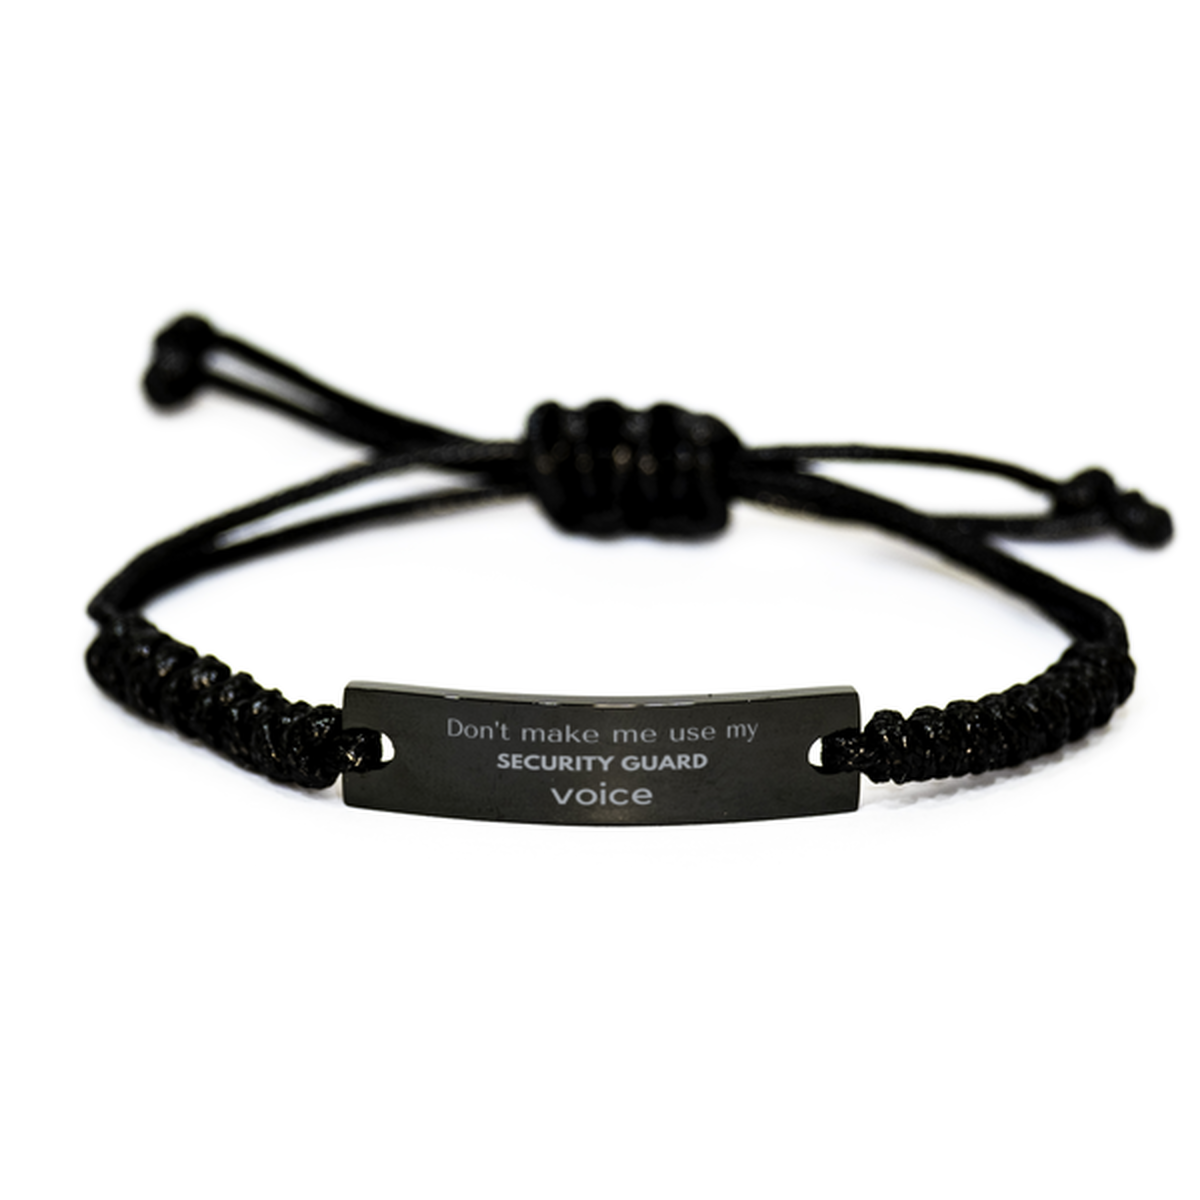 Don't make me use my Security Guard voice, Sarcasm Security Guard Gifts, Christmas Security Guard Black Rope Bracelet Birthday Unique Gifts For Security Guard Coworkers, Men, Women, Colleague, Friends